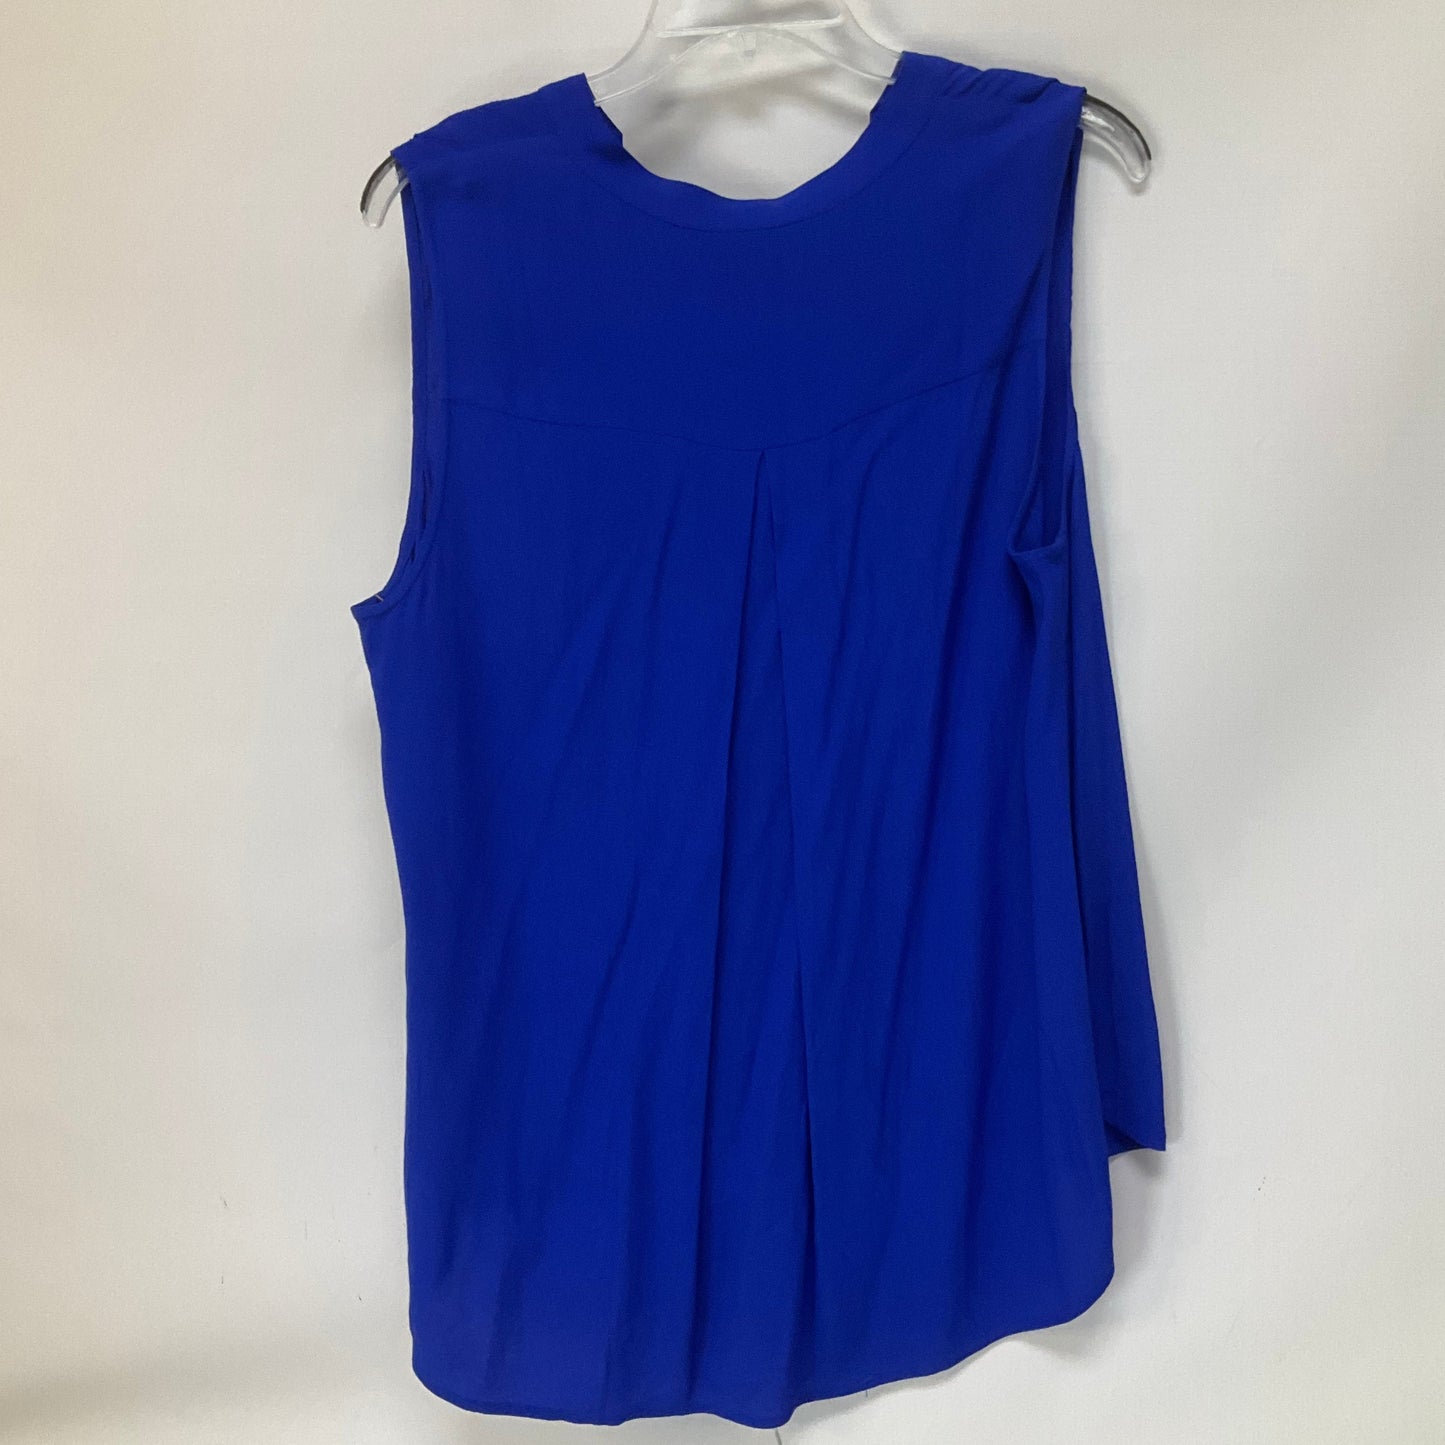 Blue Top Sleeveless Madewell, Size L